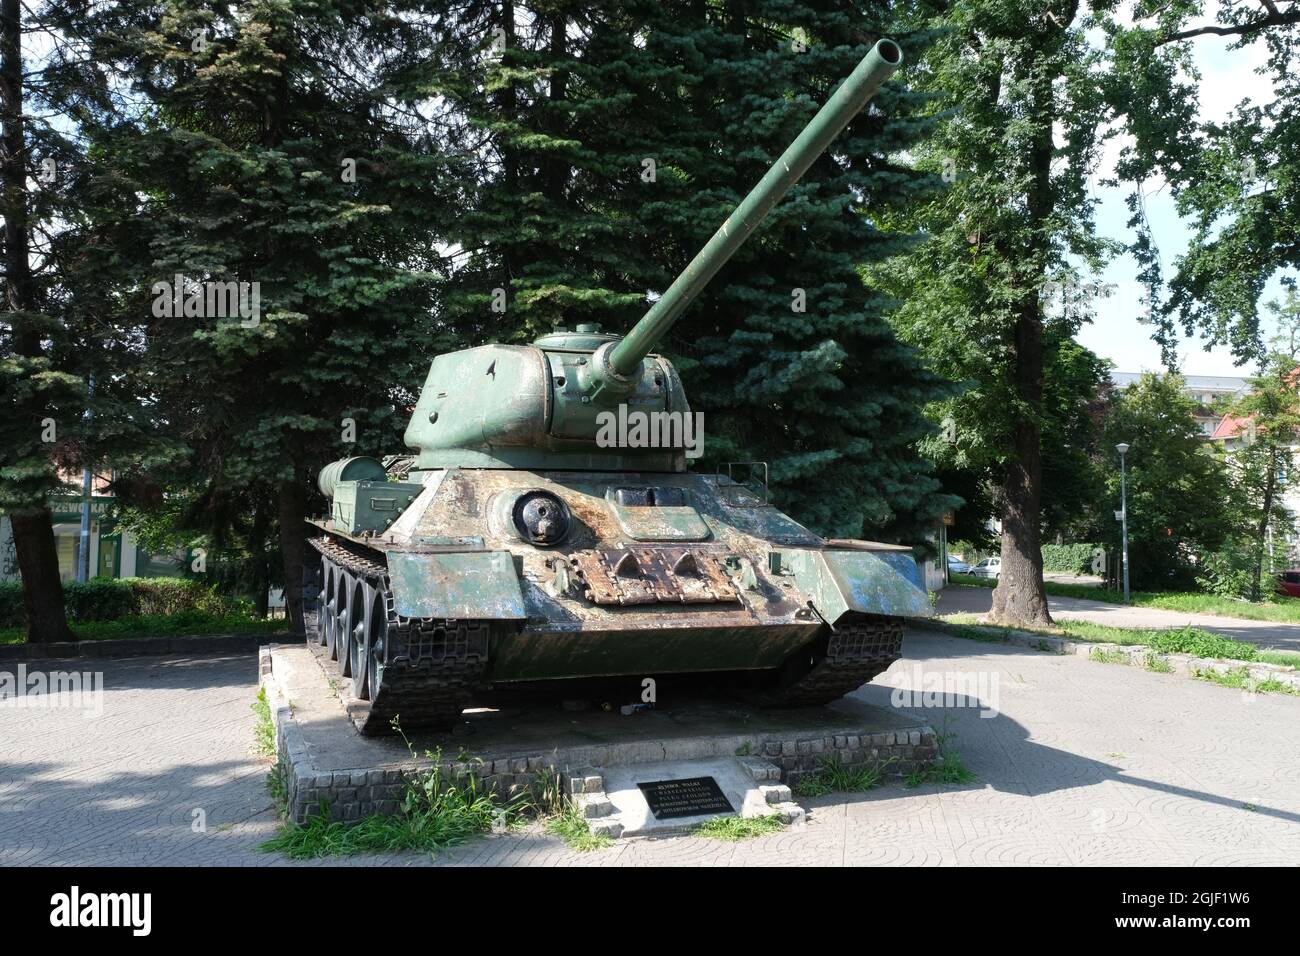 Elblag, Poland - July 21, 2021: This Soviet T-34 85 tank is standing in a park in Elblag to commemorates the battle between the Red Army and Germans Stock Photo